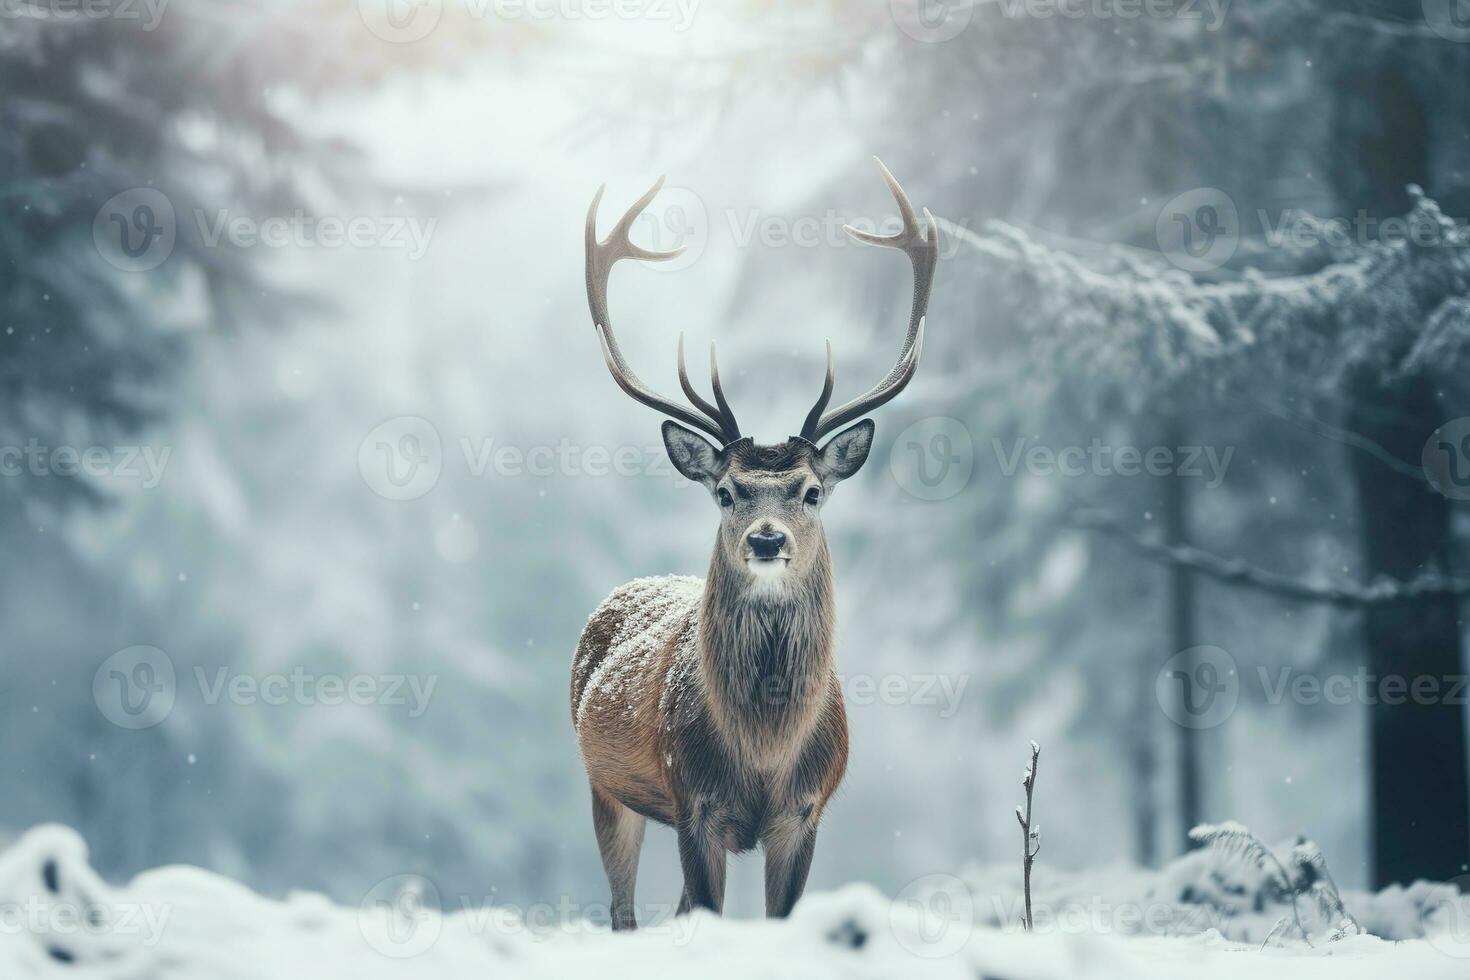 A deer stands in front of a snow covered field in a winter forest